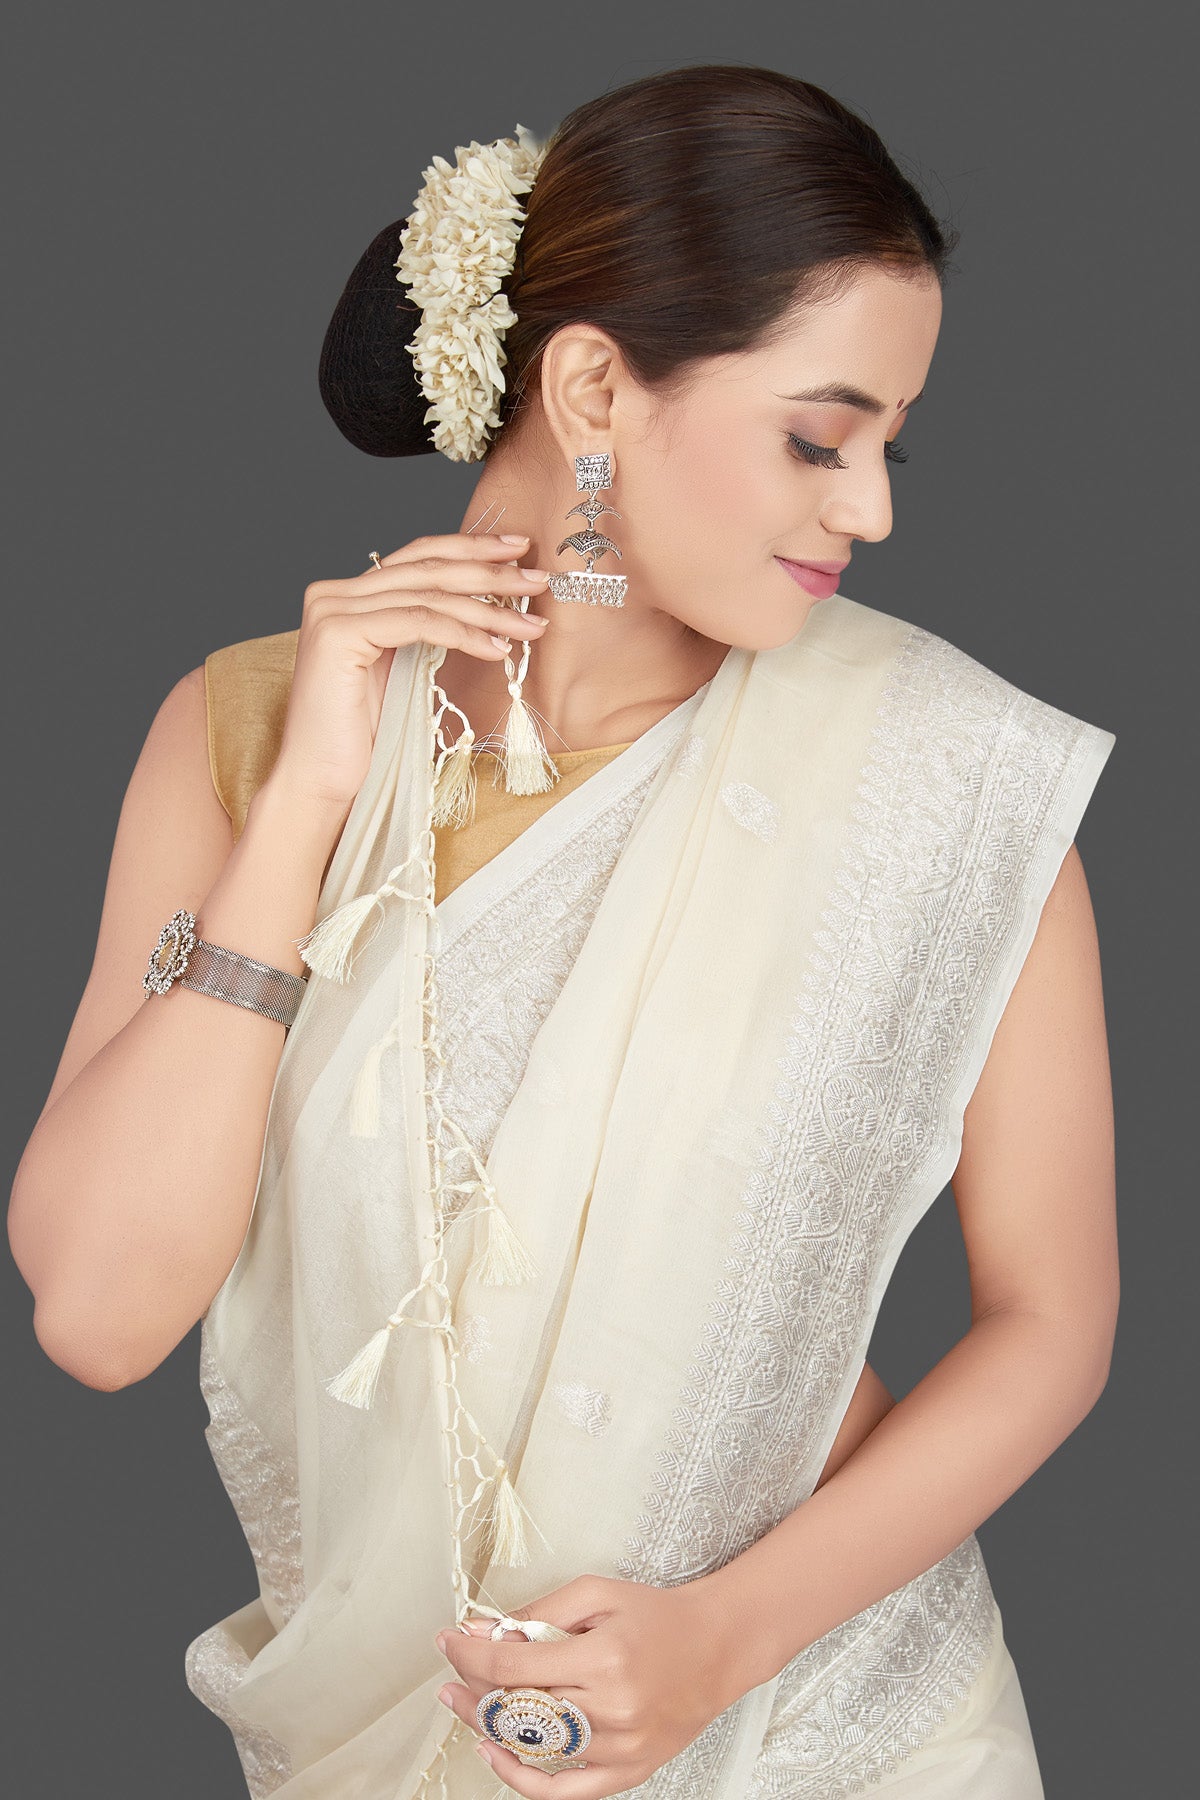 Shop cream georgette chiffon sari online in USA with silver zari border. Go for stunning Indian designer sarees, georgette sarees, handwoven sarees, embroidered sarees for festive occasions and weddings from Pure Elegance Indian clothing store in USA.-closeup